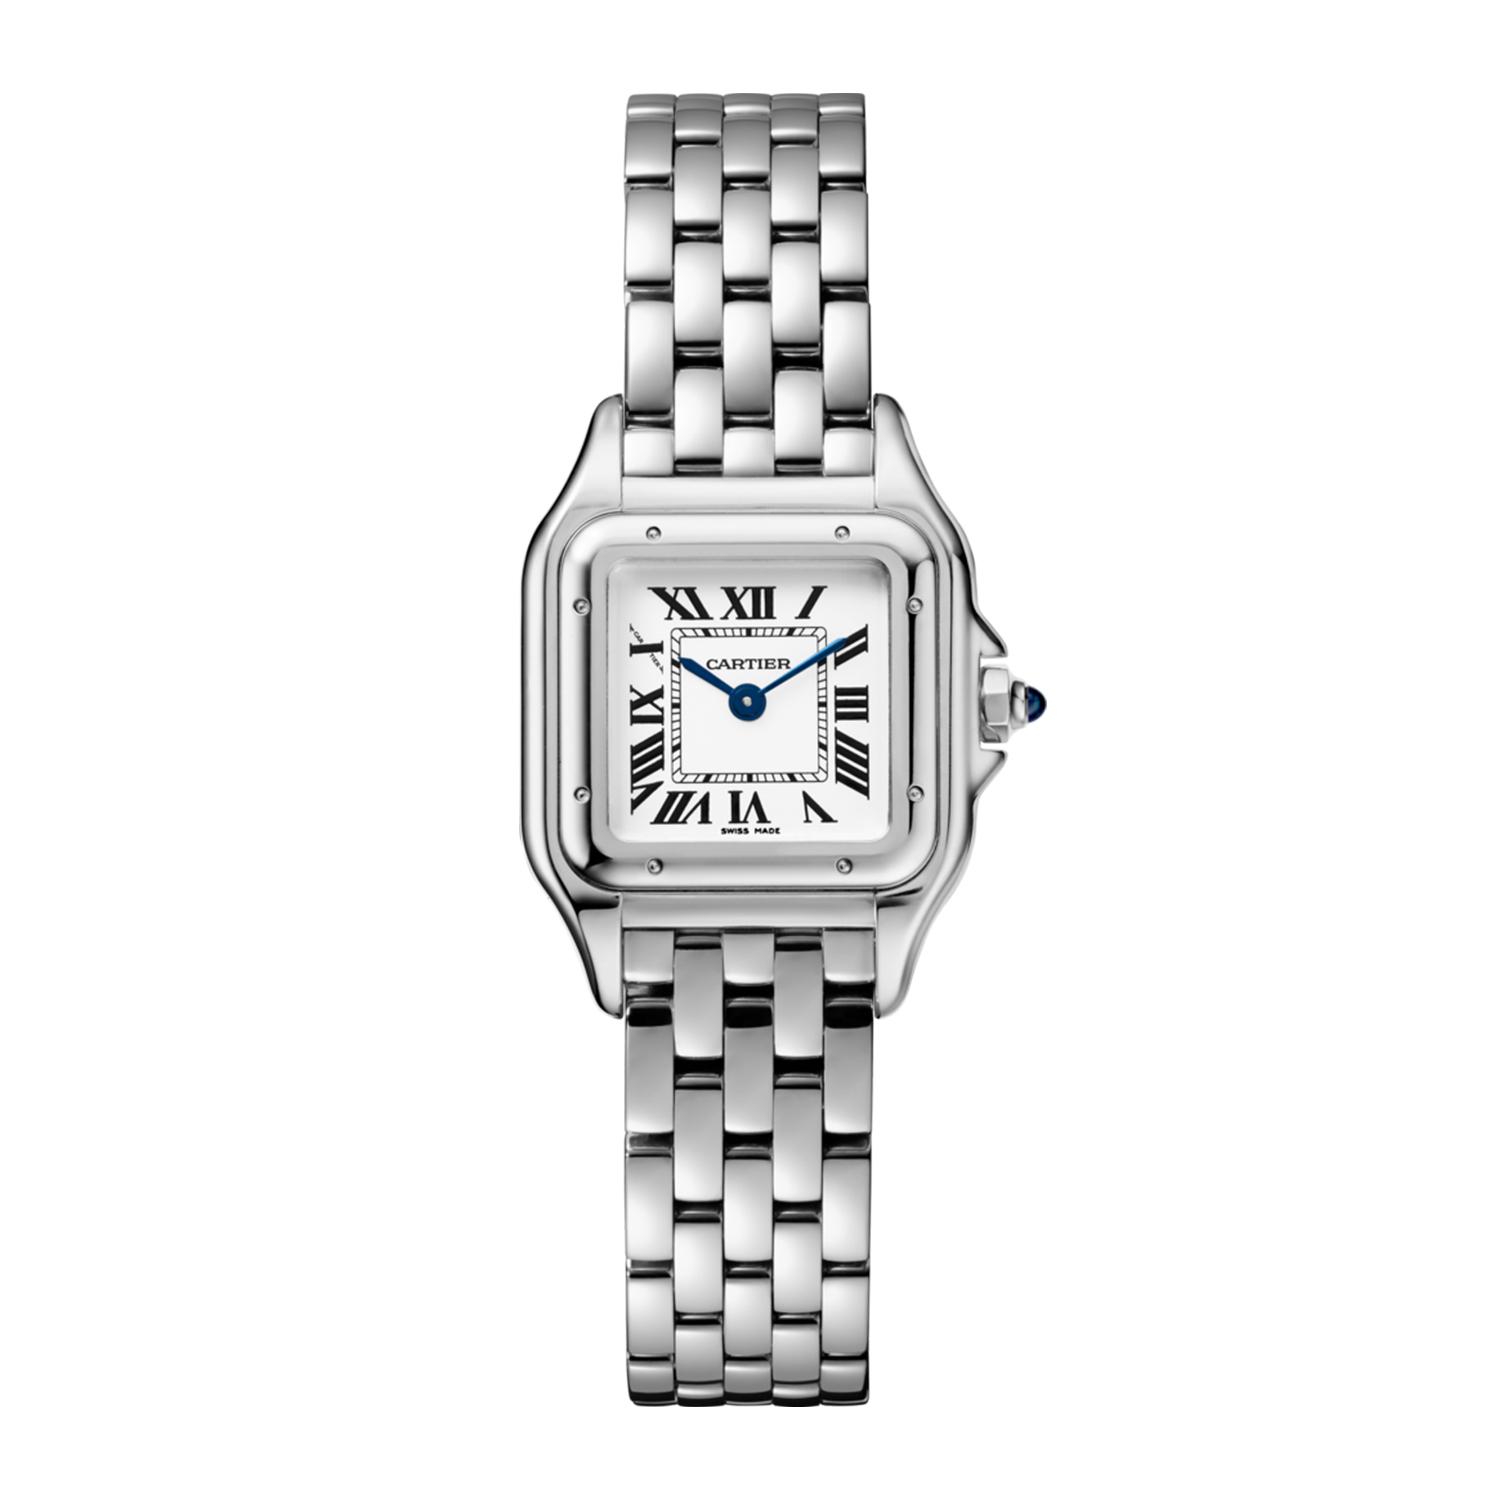 Panthere De Cartier Watch, size Small